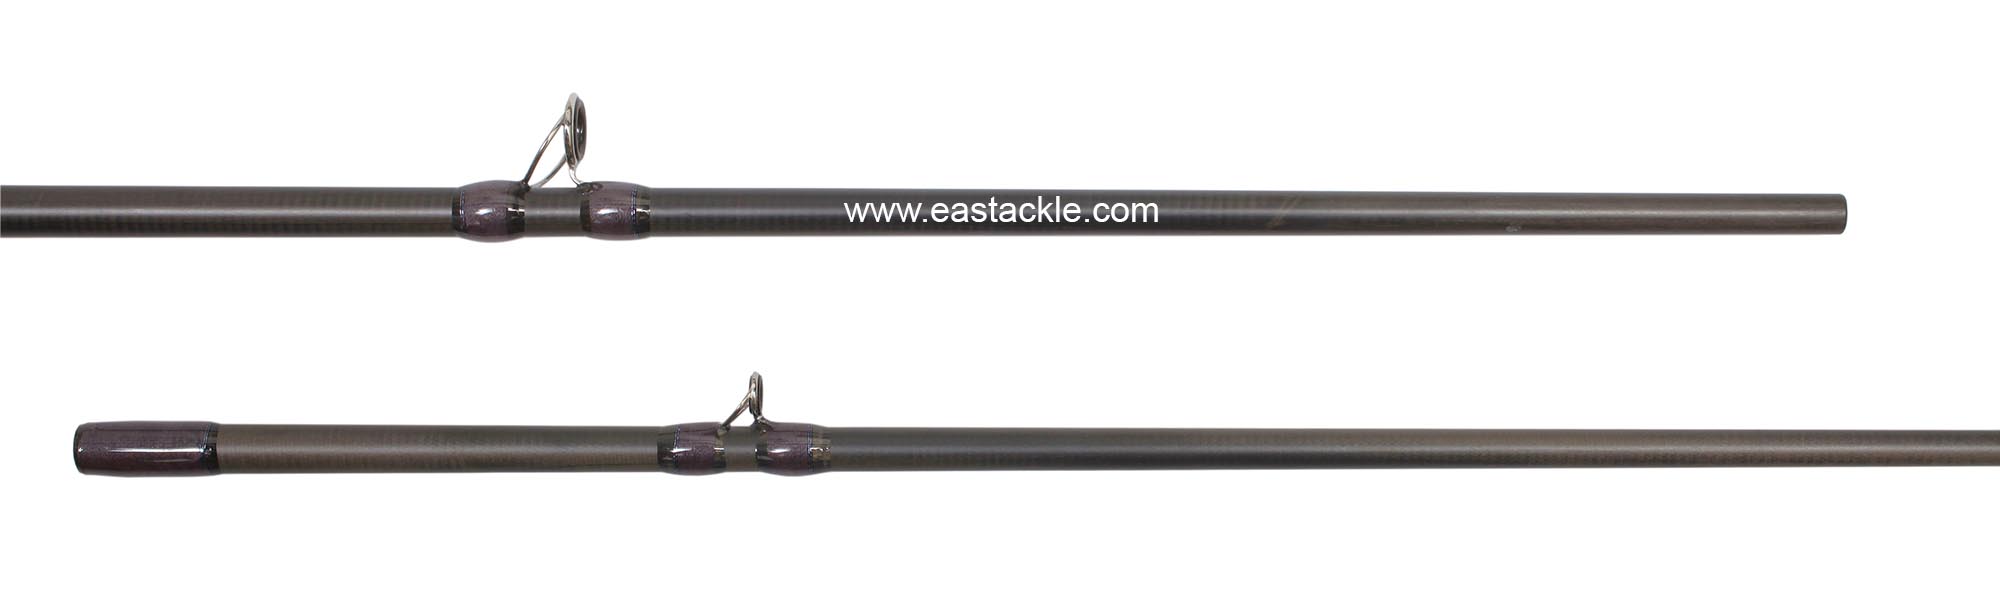 Storm - Adventure - AVC662MHF - Bait Casting Rod - Joint Section (Side View) | Eastackle